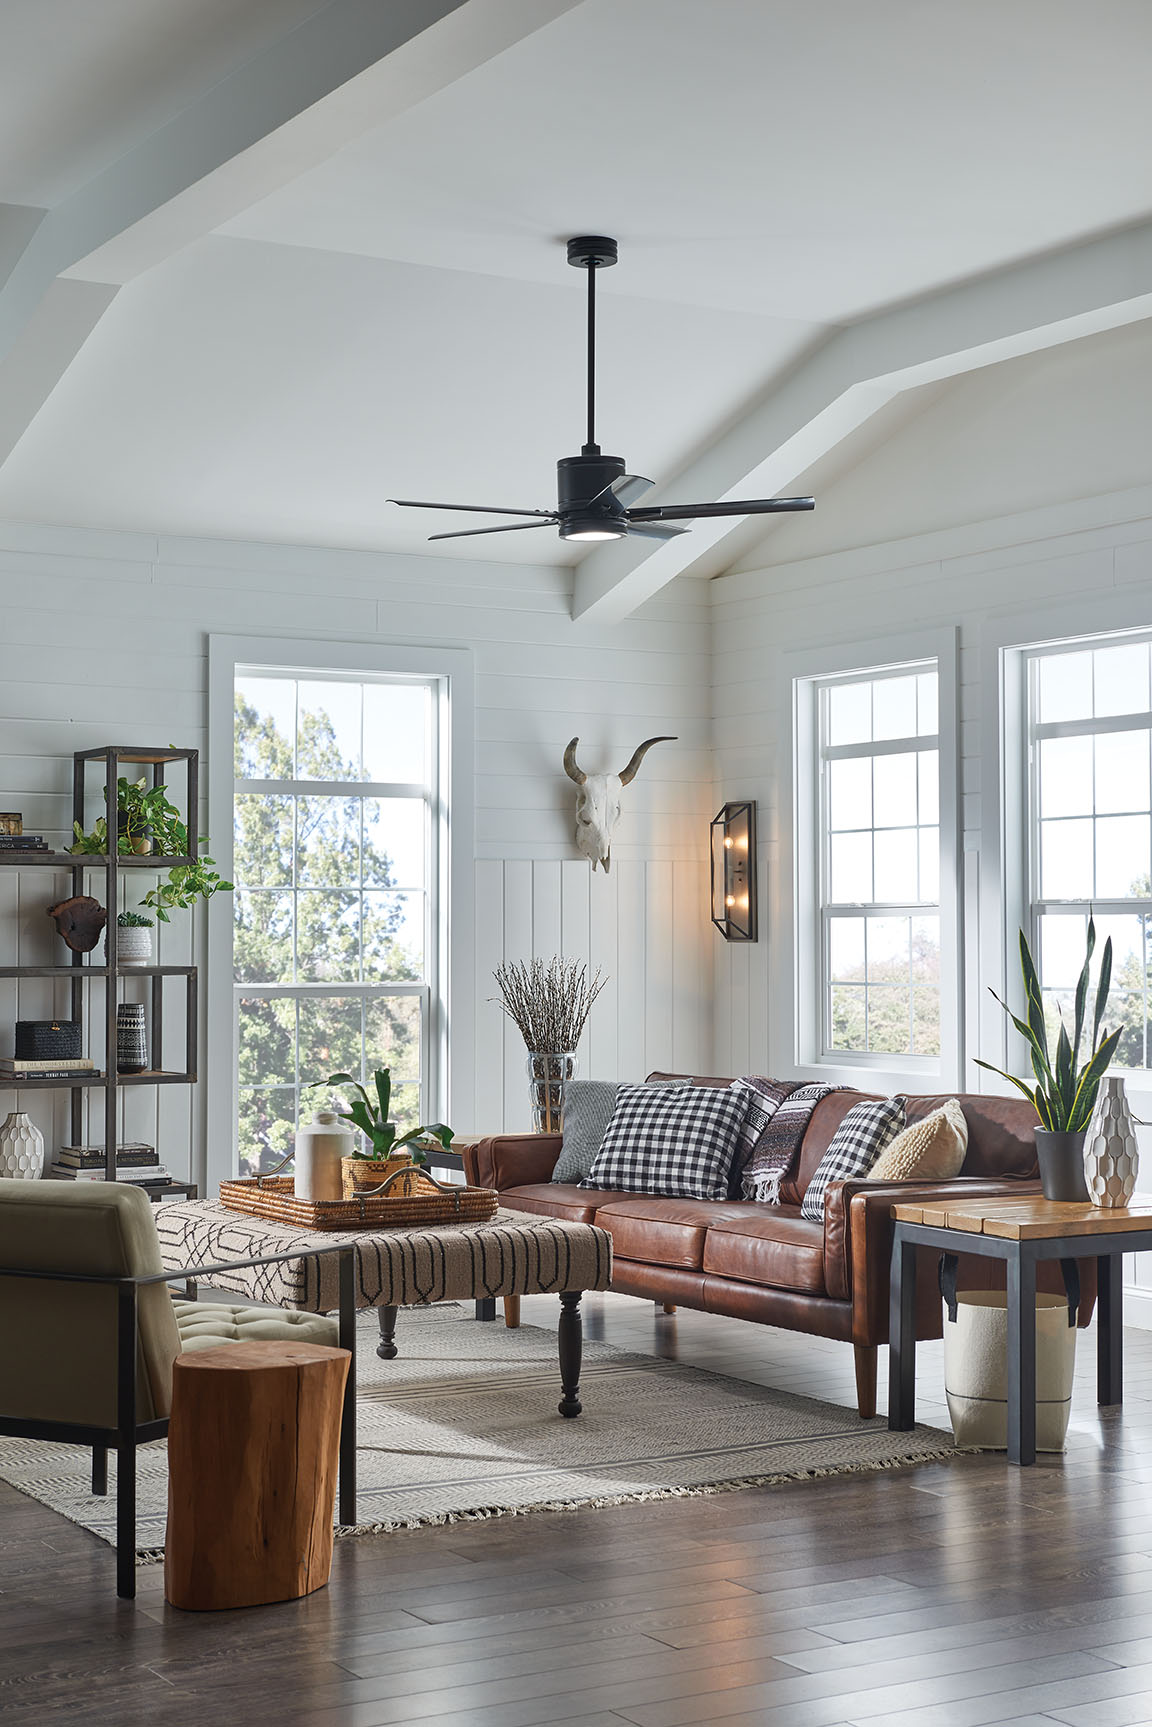 Vail LED Ceiling Fan in a rustic living room.